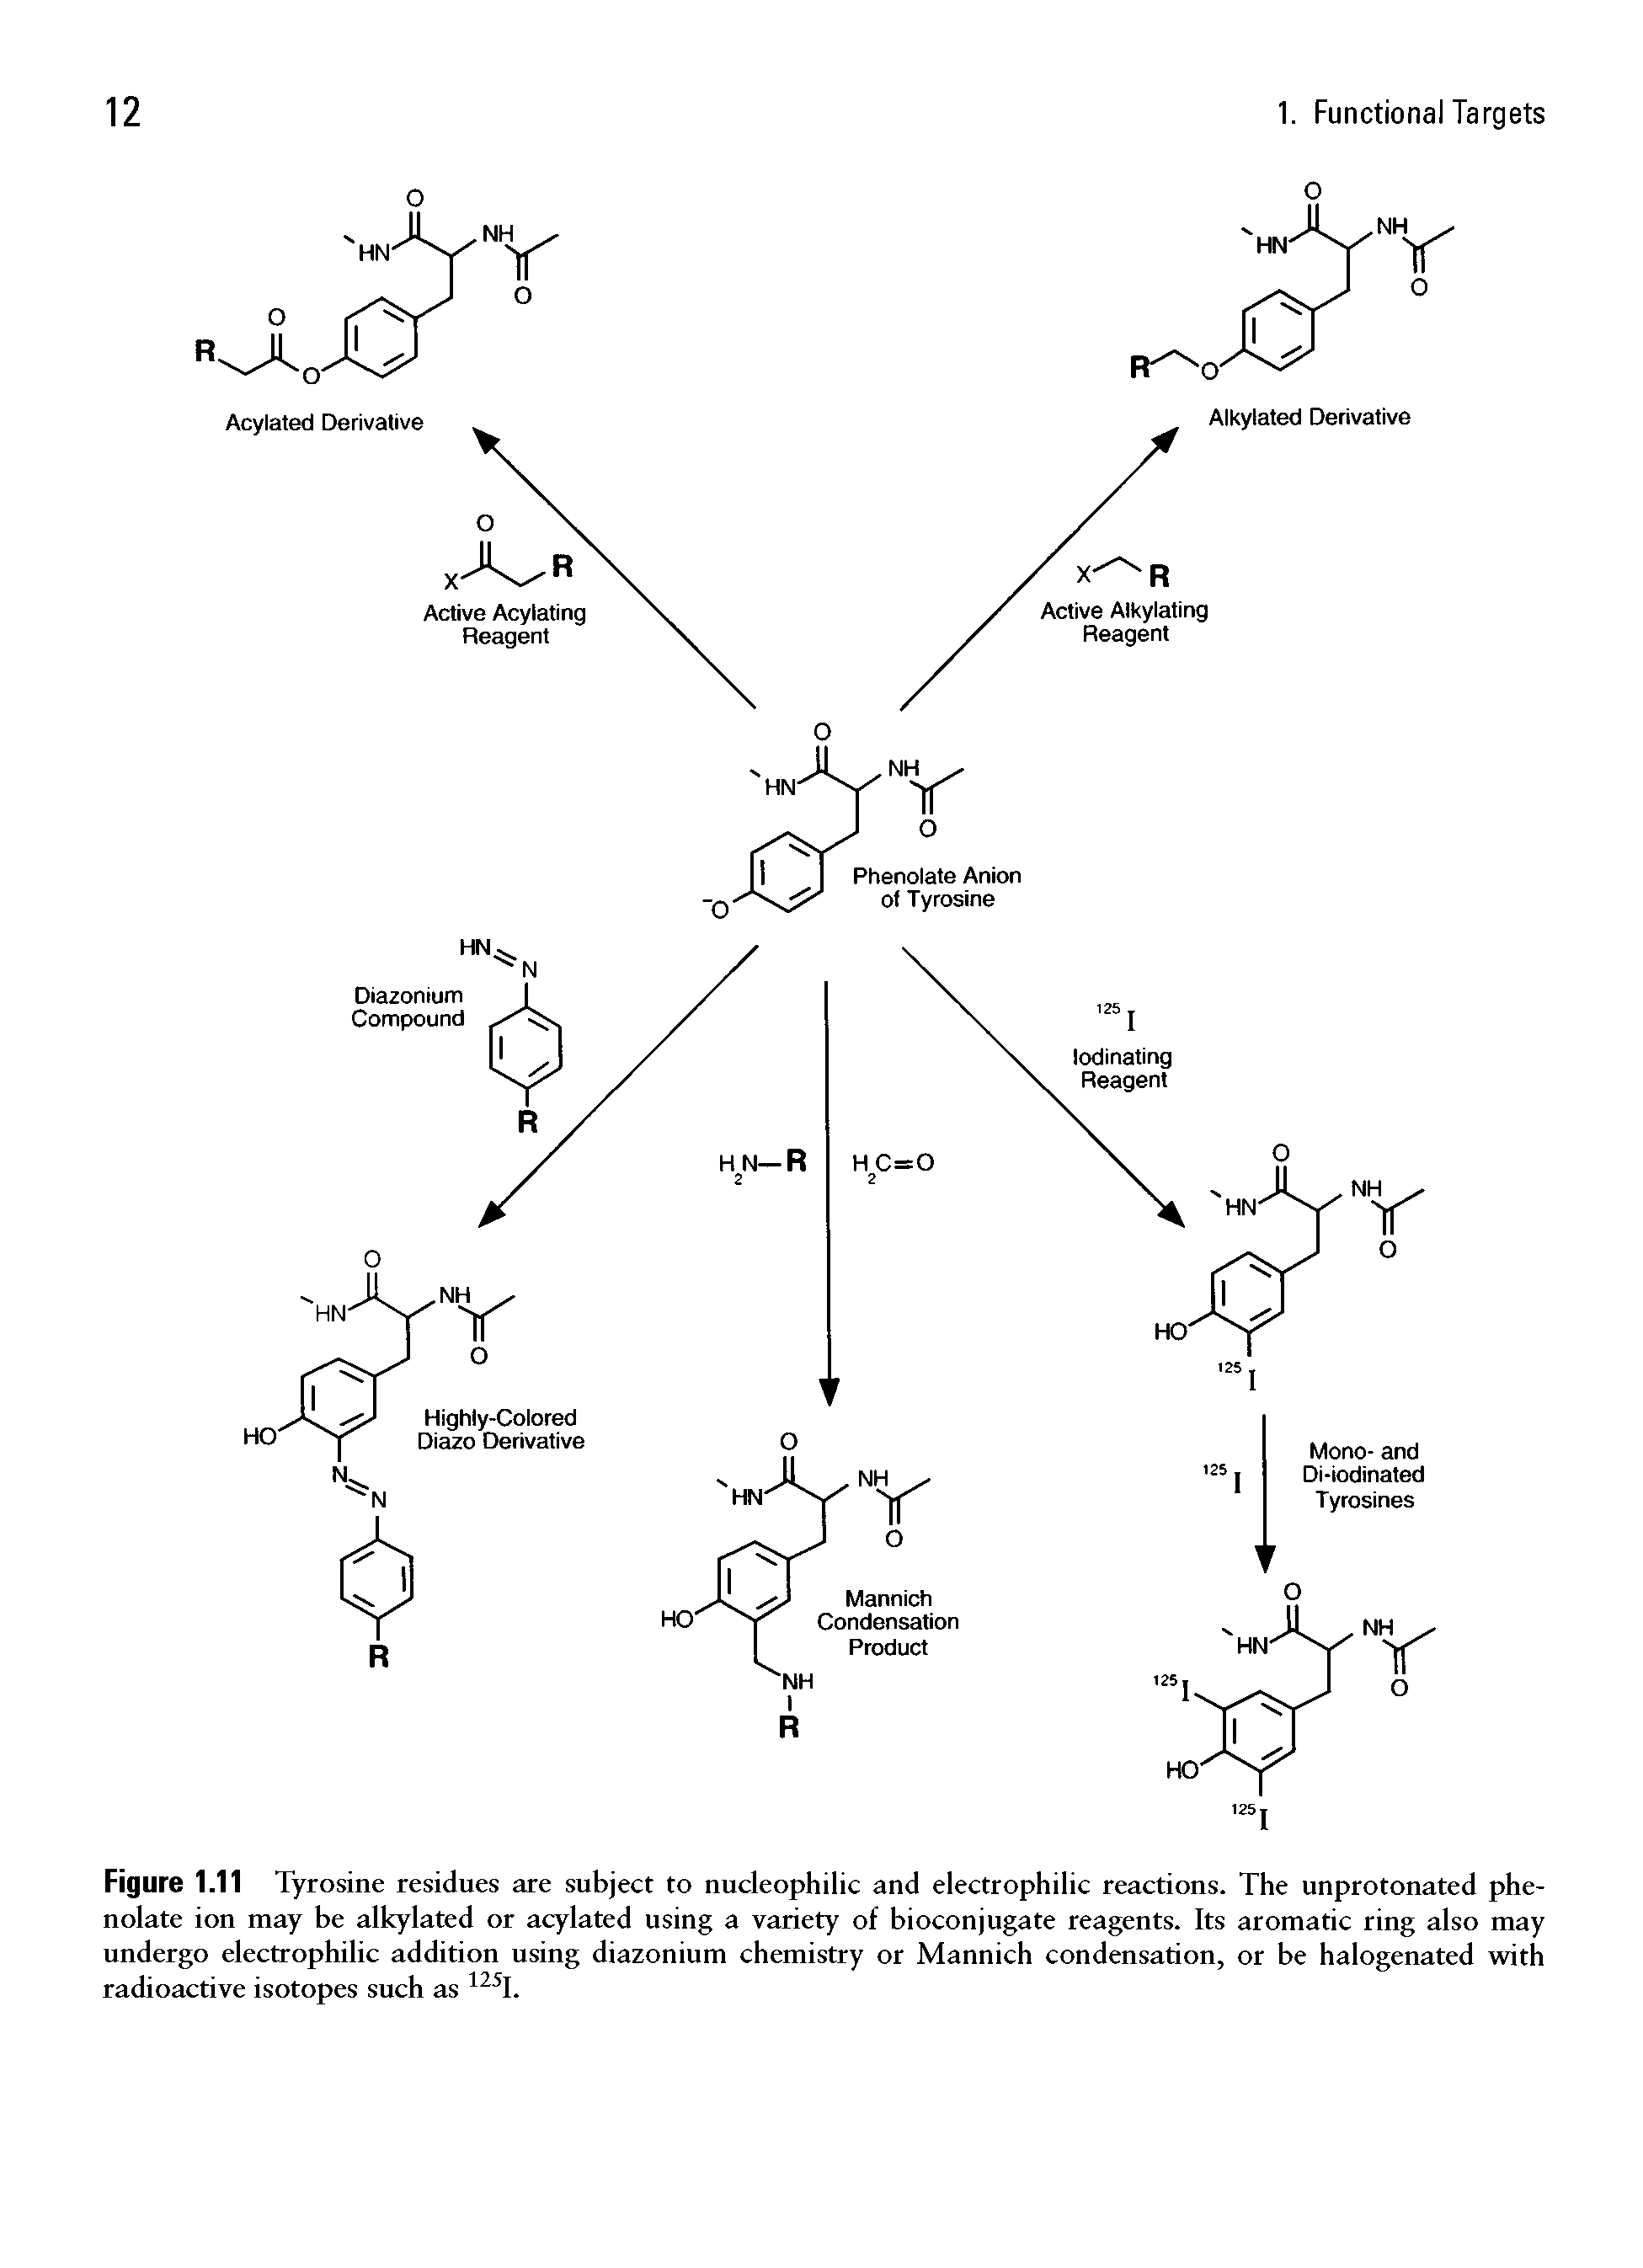 Figure 1.11 Tyrosine residues are subject to nucleophilic and electrophilic reactions. The unprotonated phe-nolate ion may be alkylated or acylated using a variety of bioconjugate reagents. Its aromatic ring also may undergo electrophilic addition using diazonium chemistry or Mannich condensation, or be halogenated with radioactive isotopes such as 12iI.